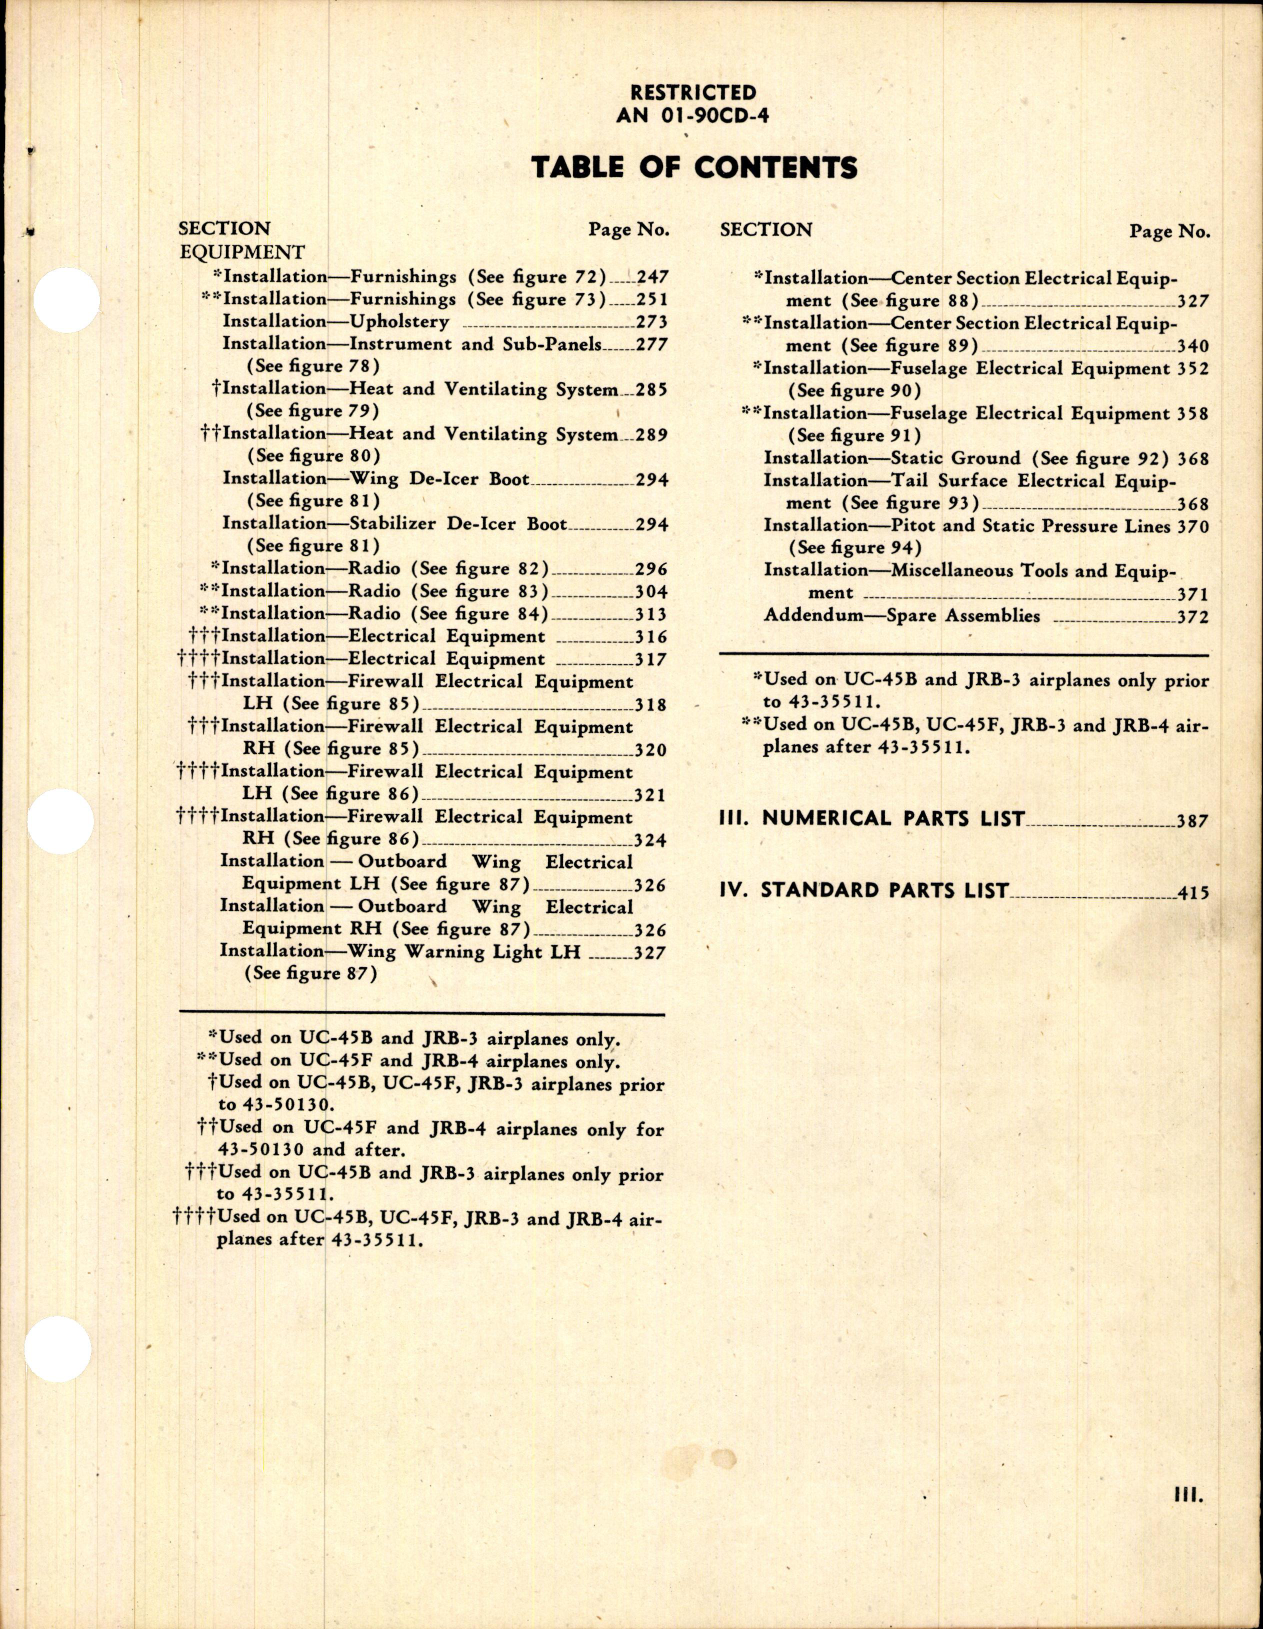 Sample page 5 from AirCorps Library document: Parts Catalog for UC-45B, UC-45F, JRB-3, and JRB-4